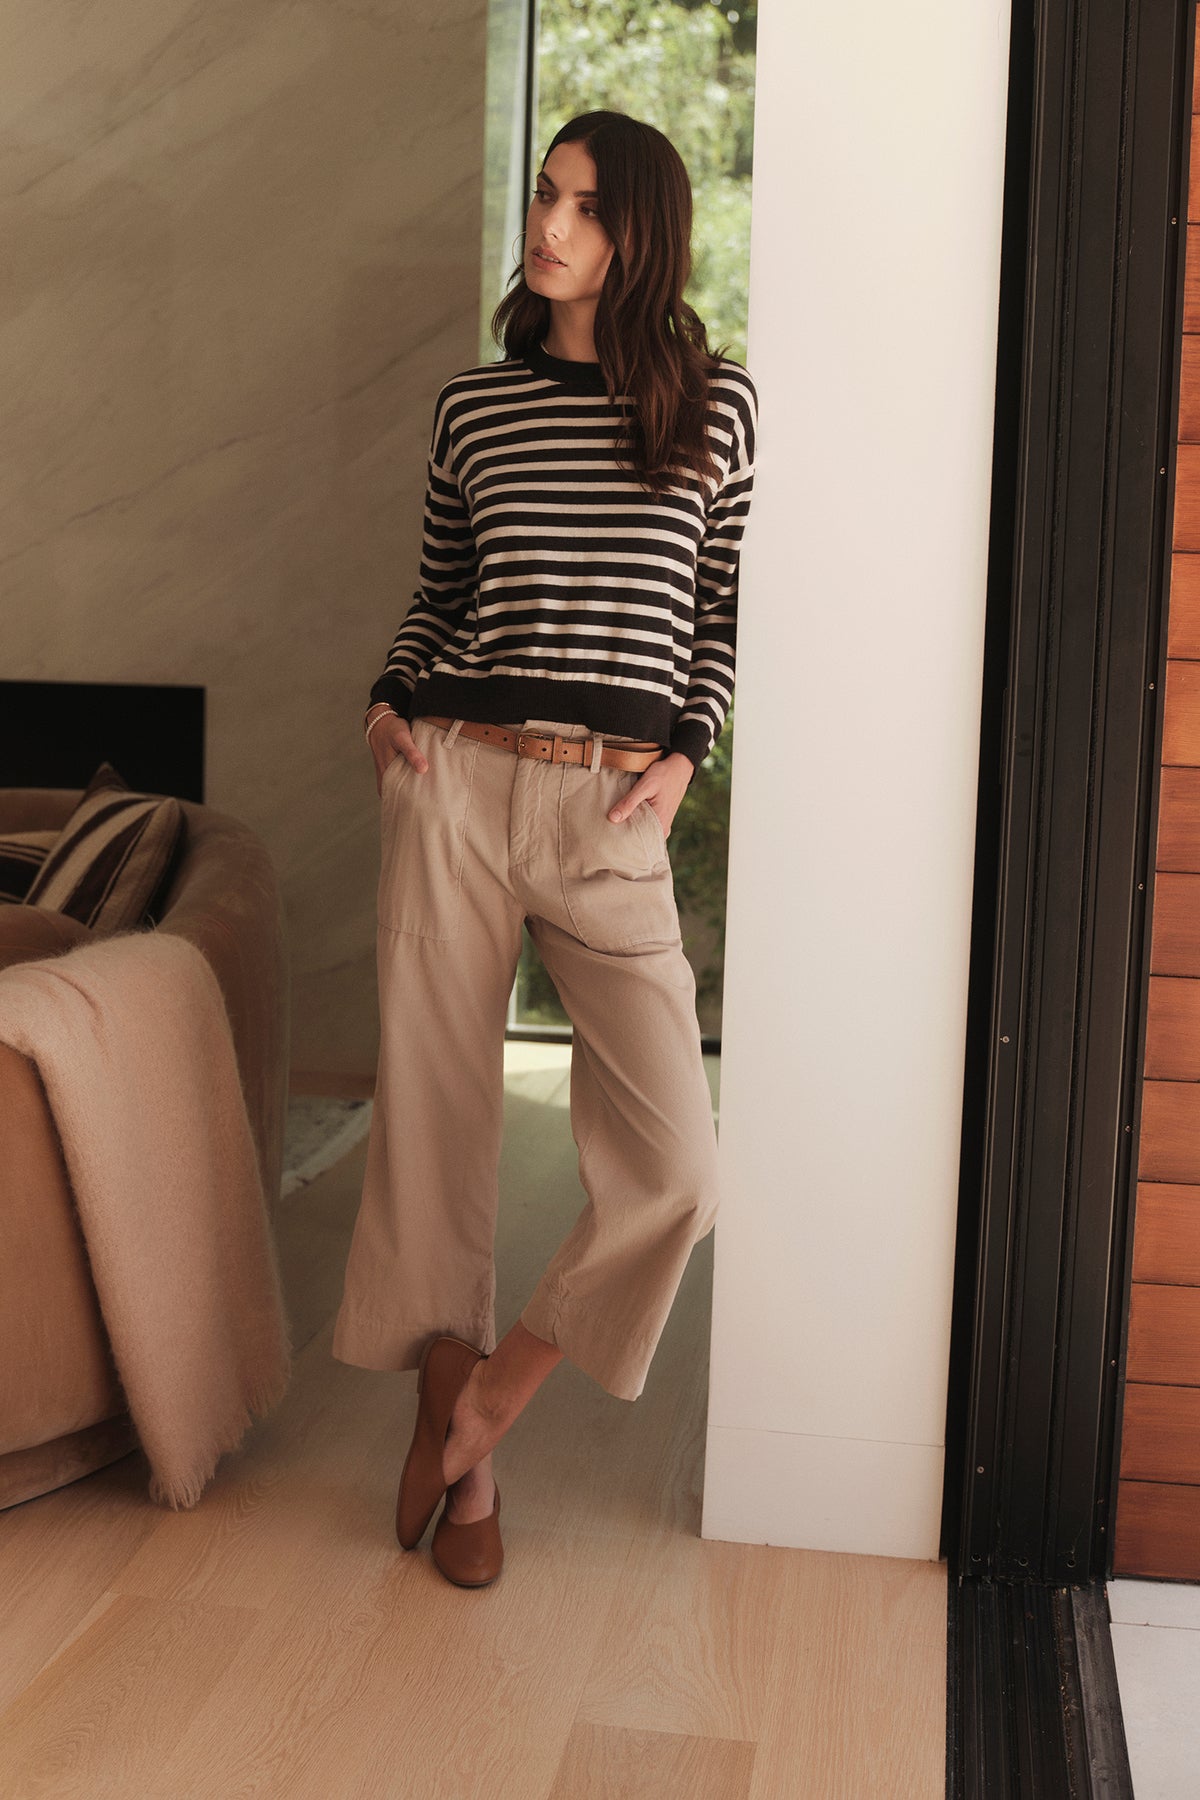 A woman wearing the Velvet by Graham & Spencer ALISTER STRIPED CREW NECK SWEATER and beige culottes.-26883590619329